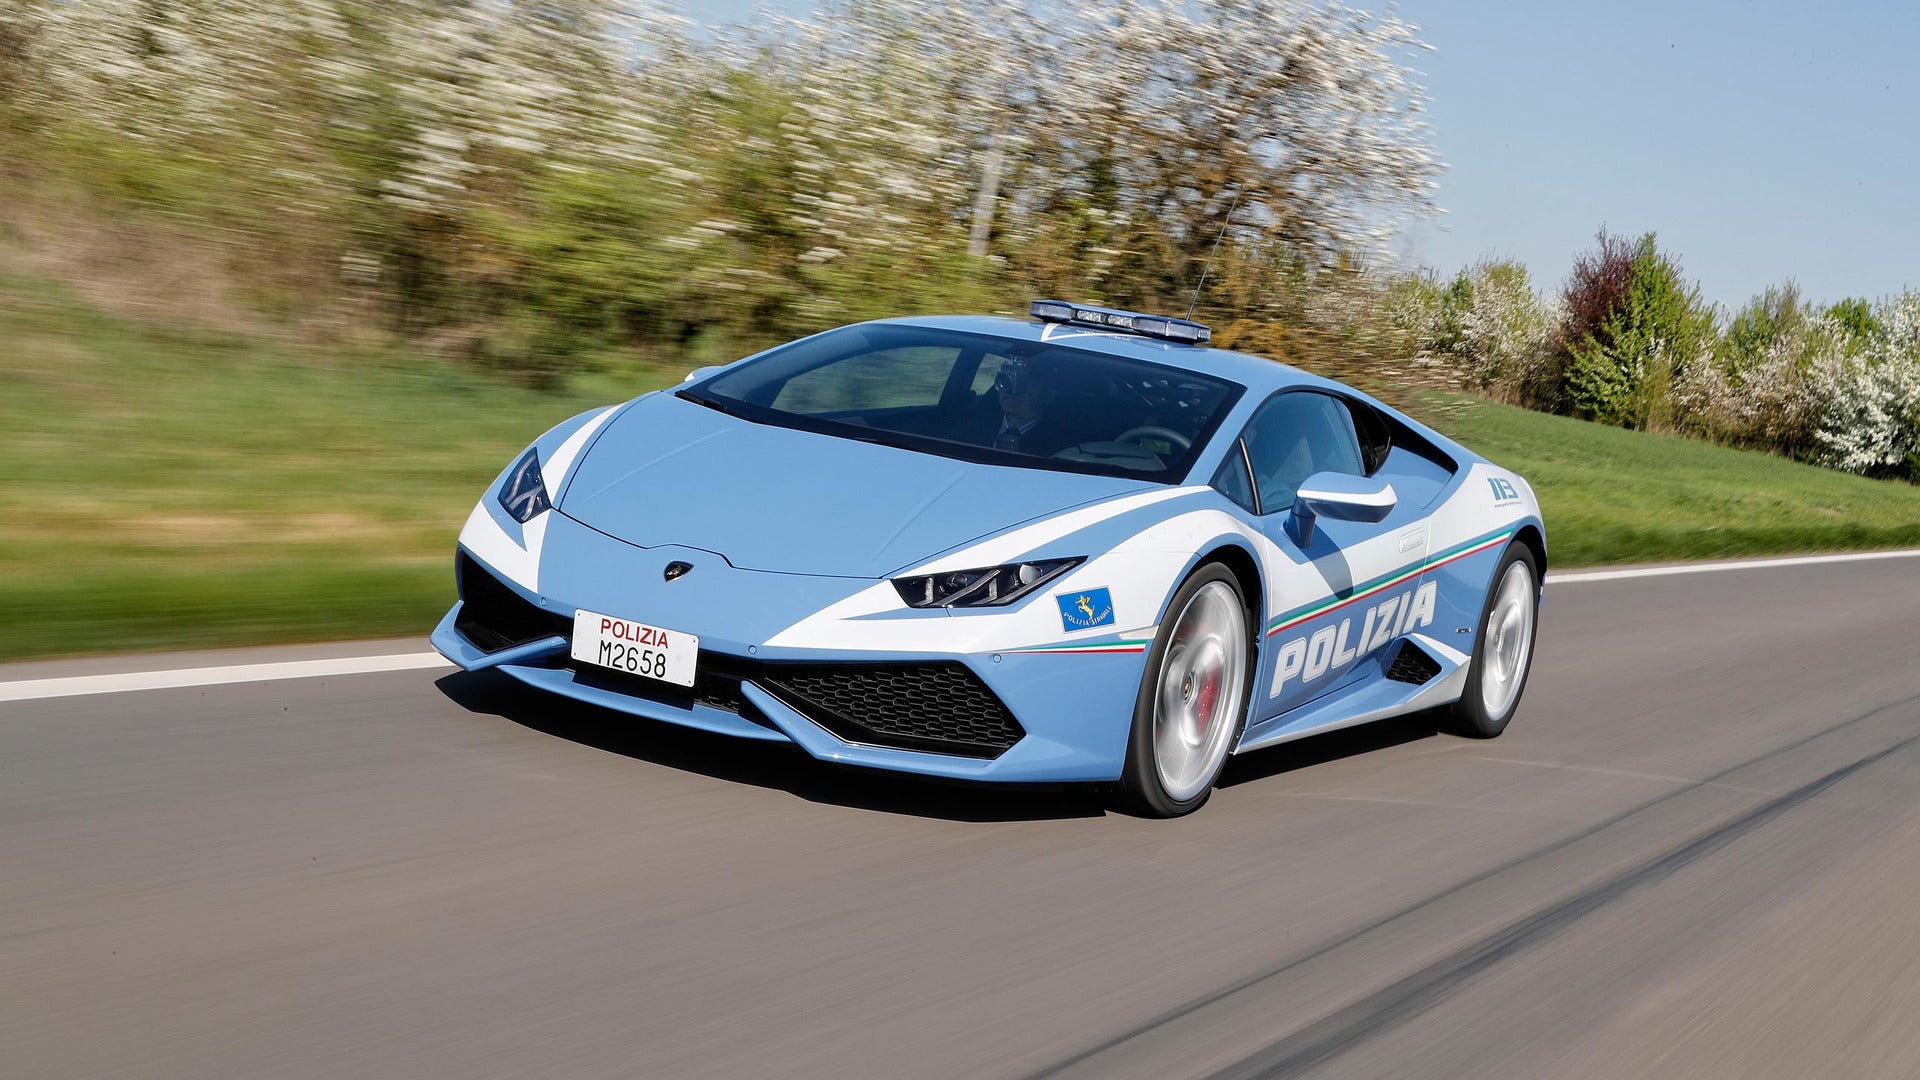 Italian Police Use Lamborghini Huracan to Transport Kidney 300 Miles in Just Two Hours